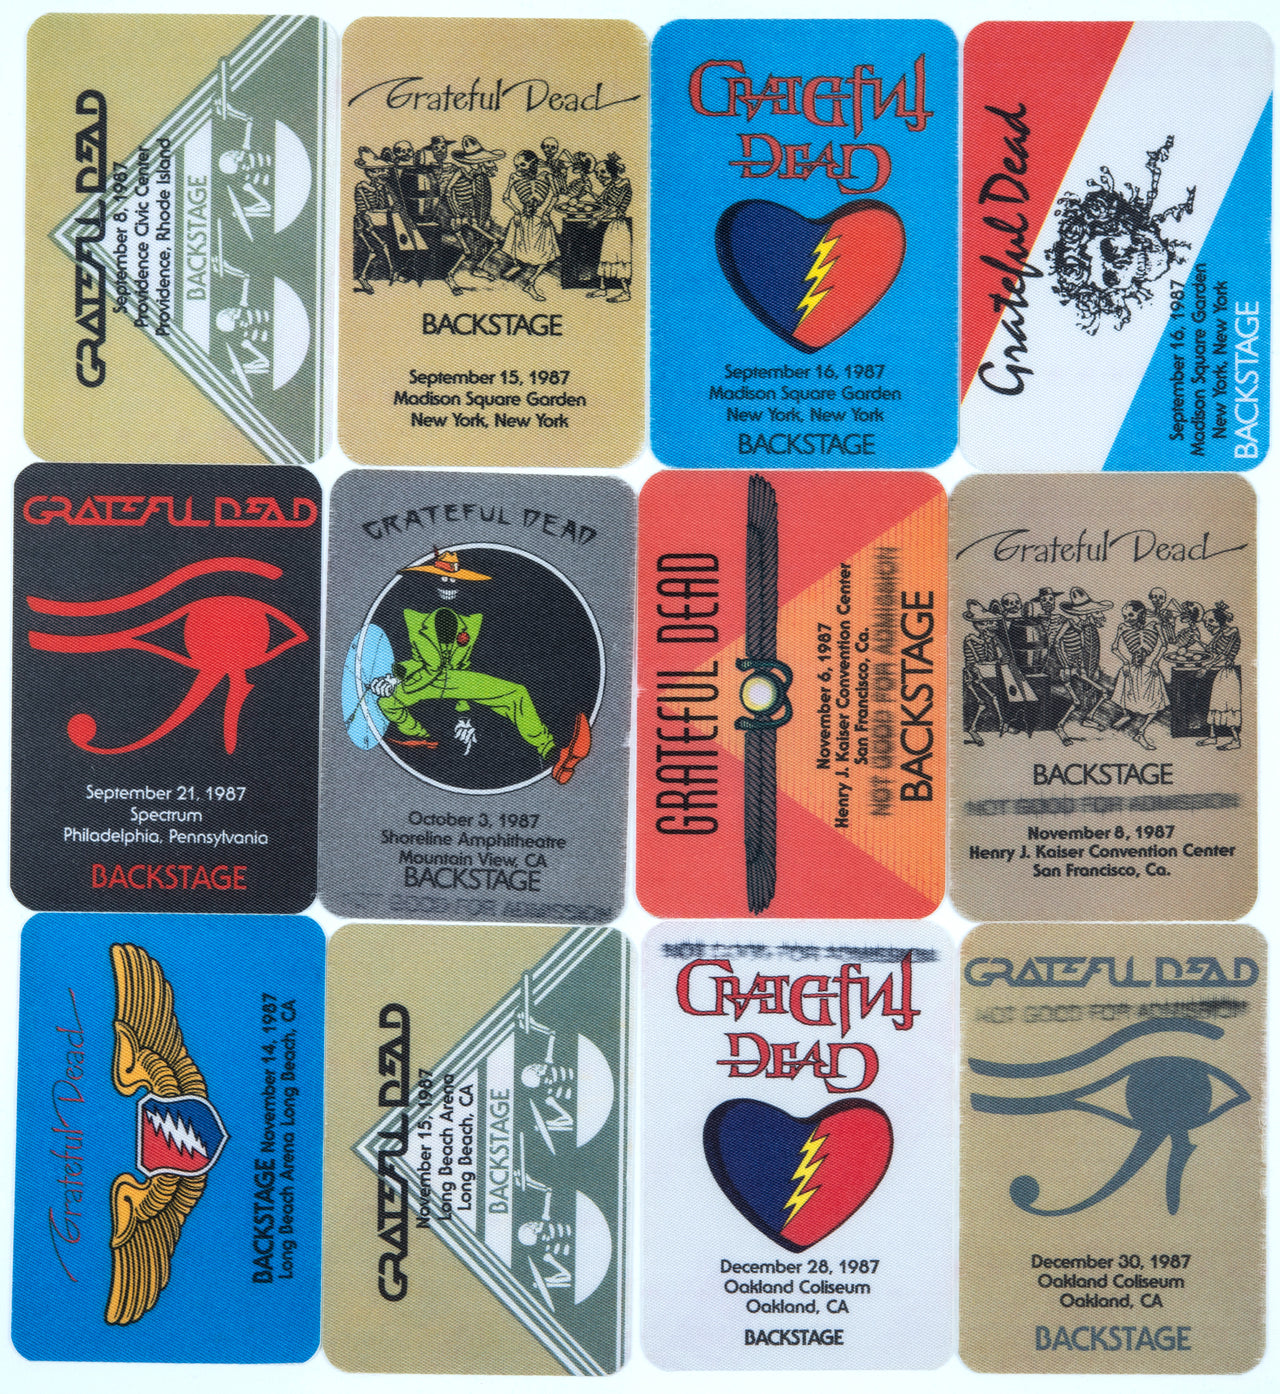 Grateful Dead Backstage Passes (9/8/1987 - 12/30/1987) from Dan Healy